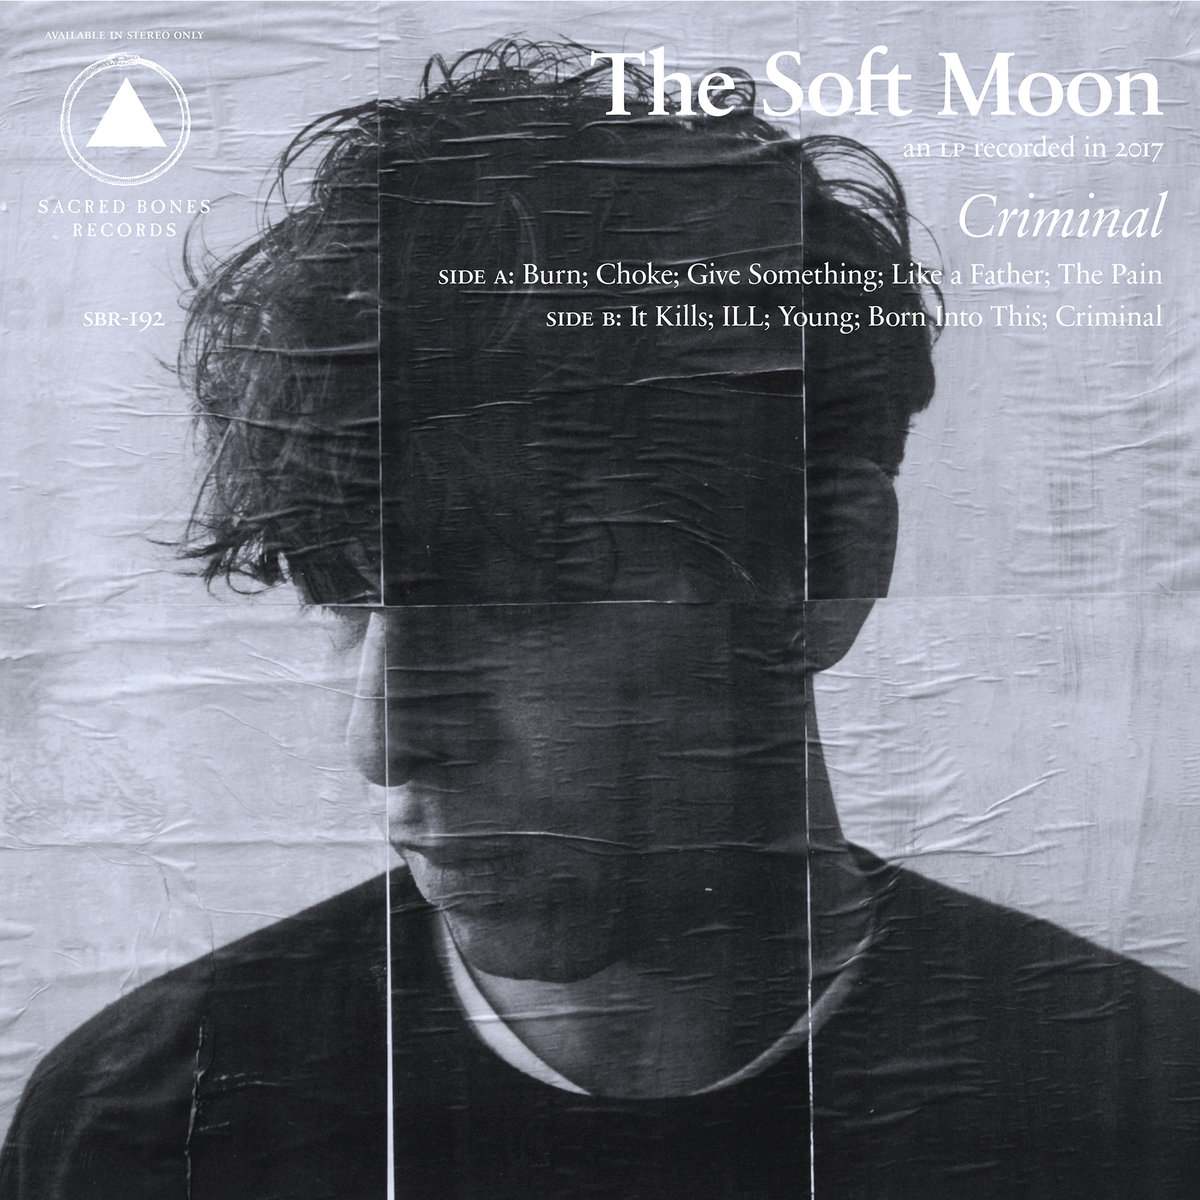 Review of 'Criminal' by The Soft Moon